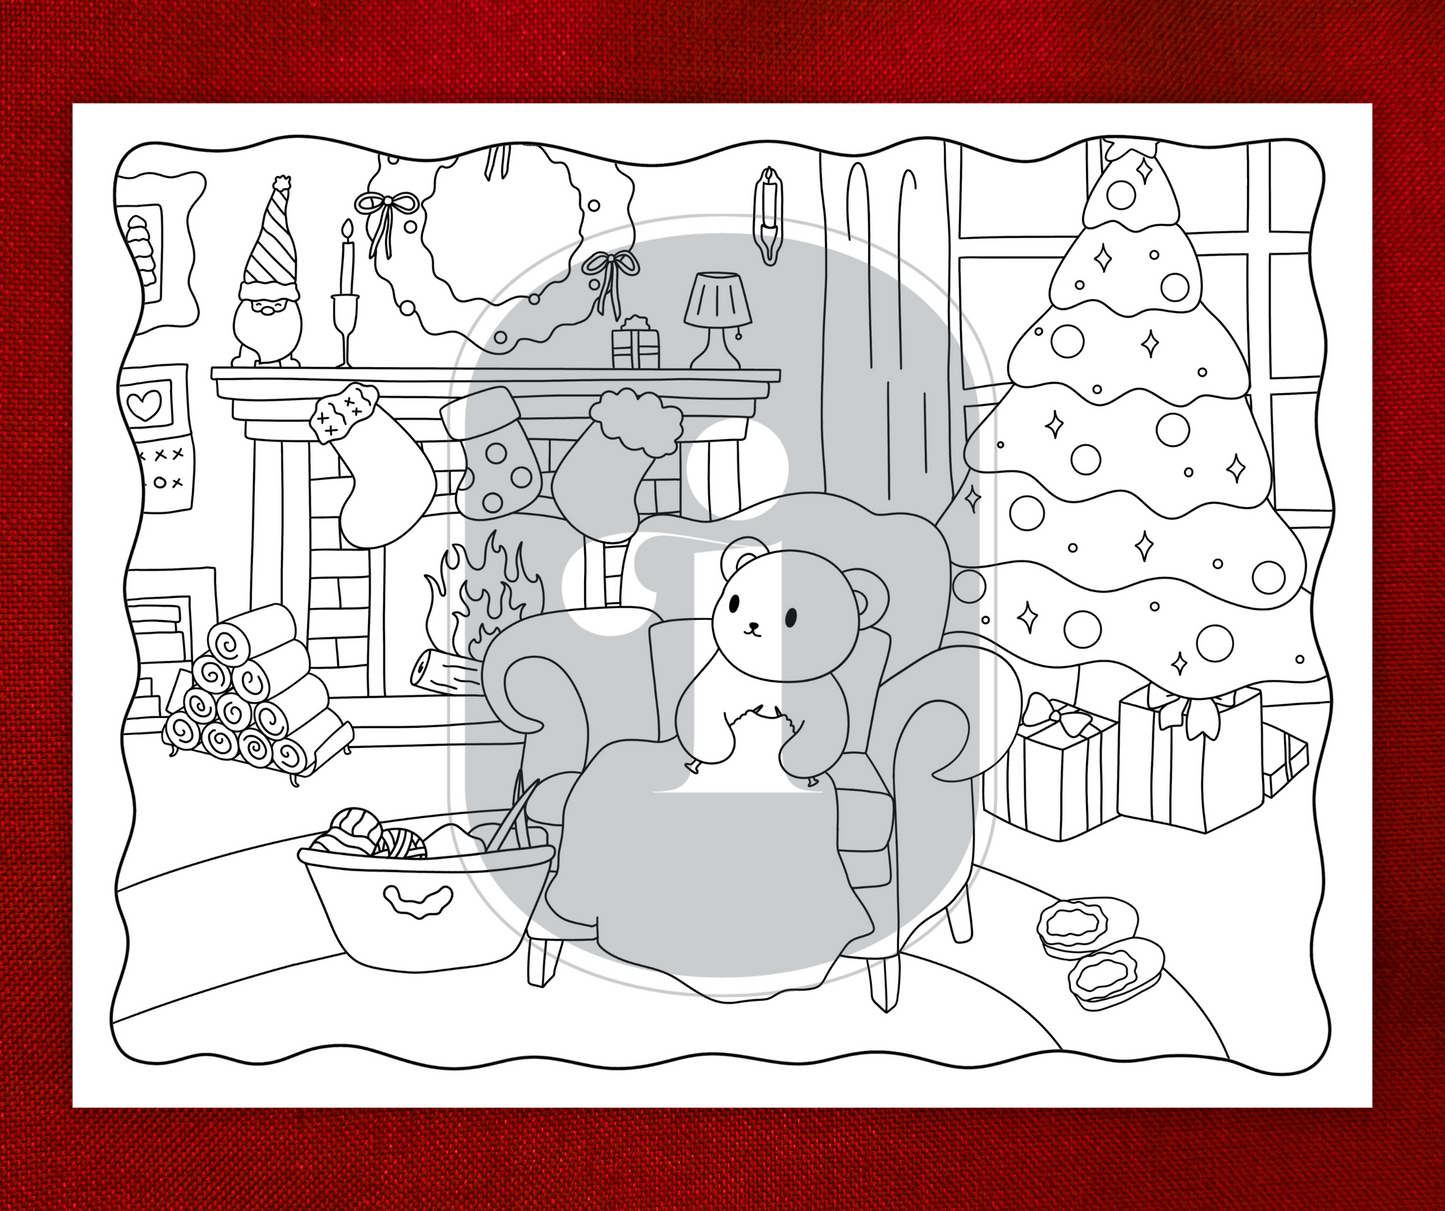 Winter Coloring Page - Knitting